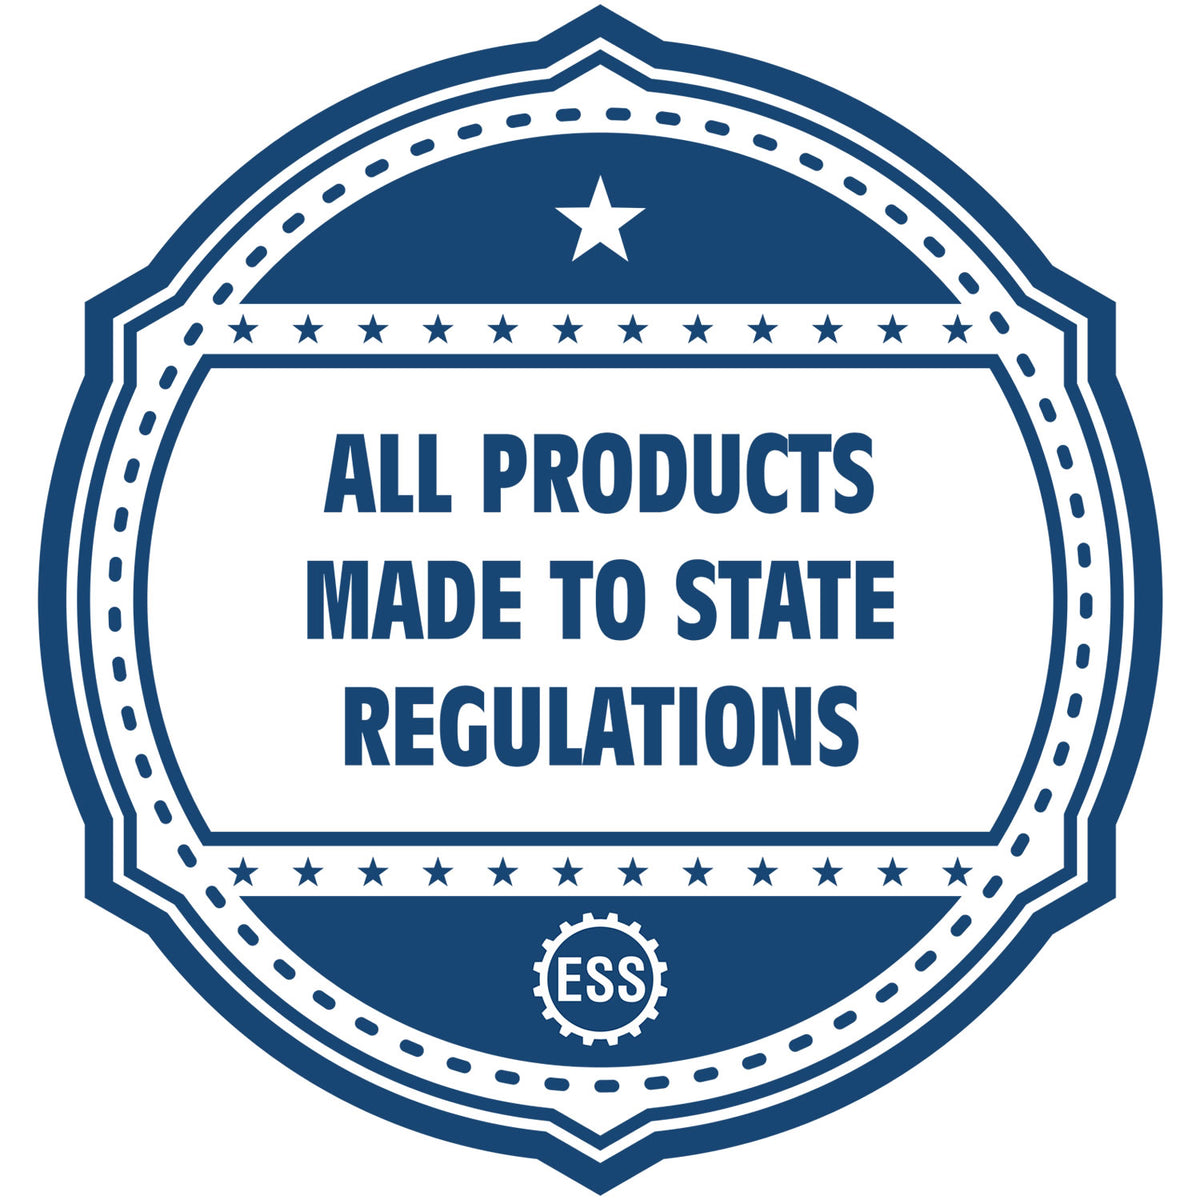 An icon or badge element for the Self-Inking Rectangular Washington Notary Stamp showing that this product is made in compliance with state regulations.